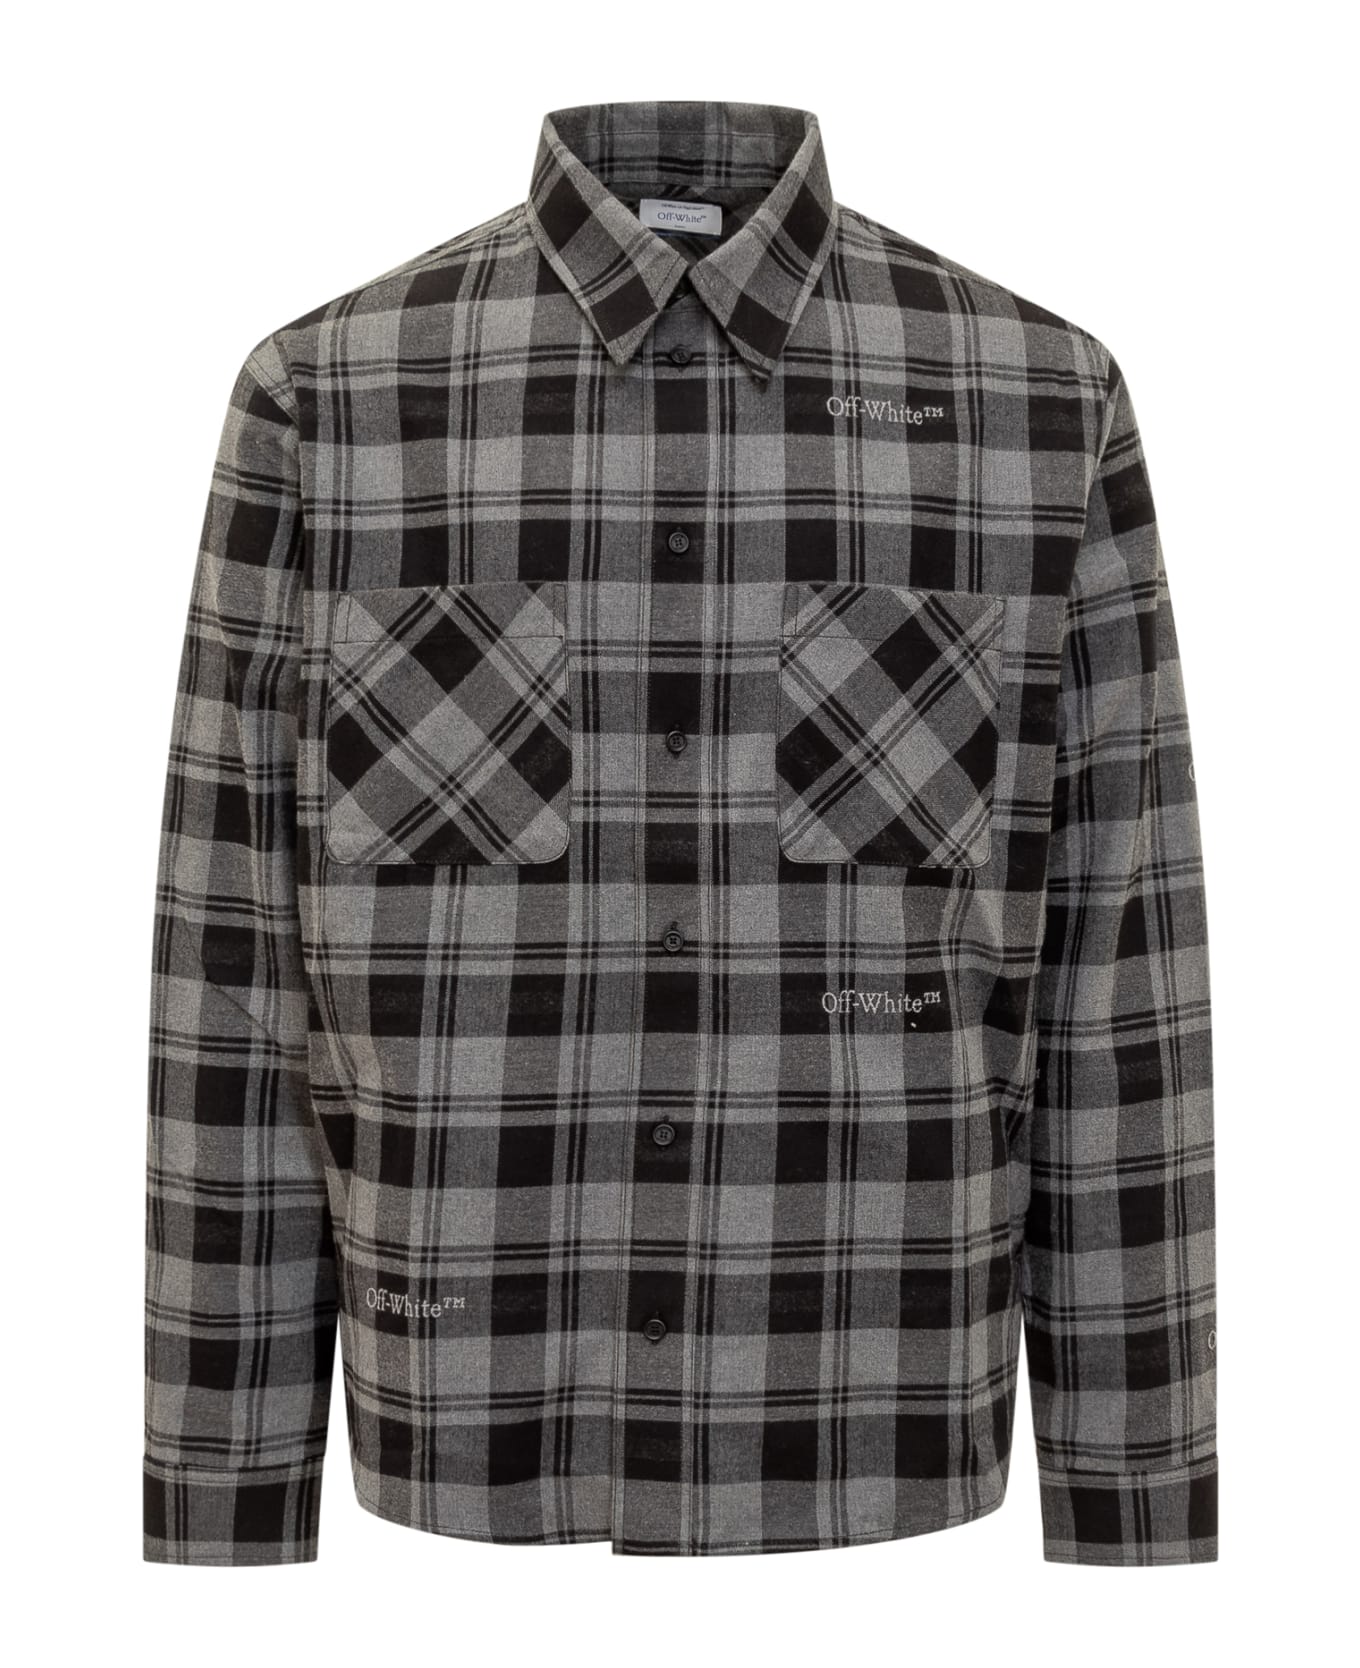 Off-White Check Patterned Buttoned Shirt - GREY BLACK